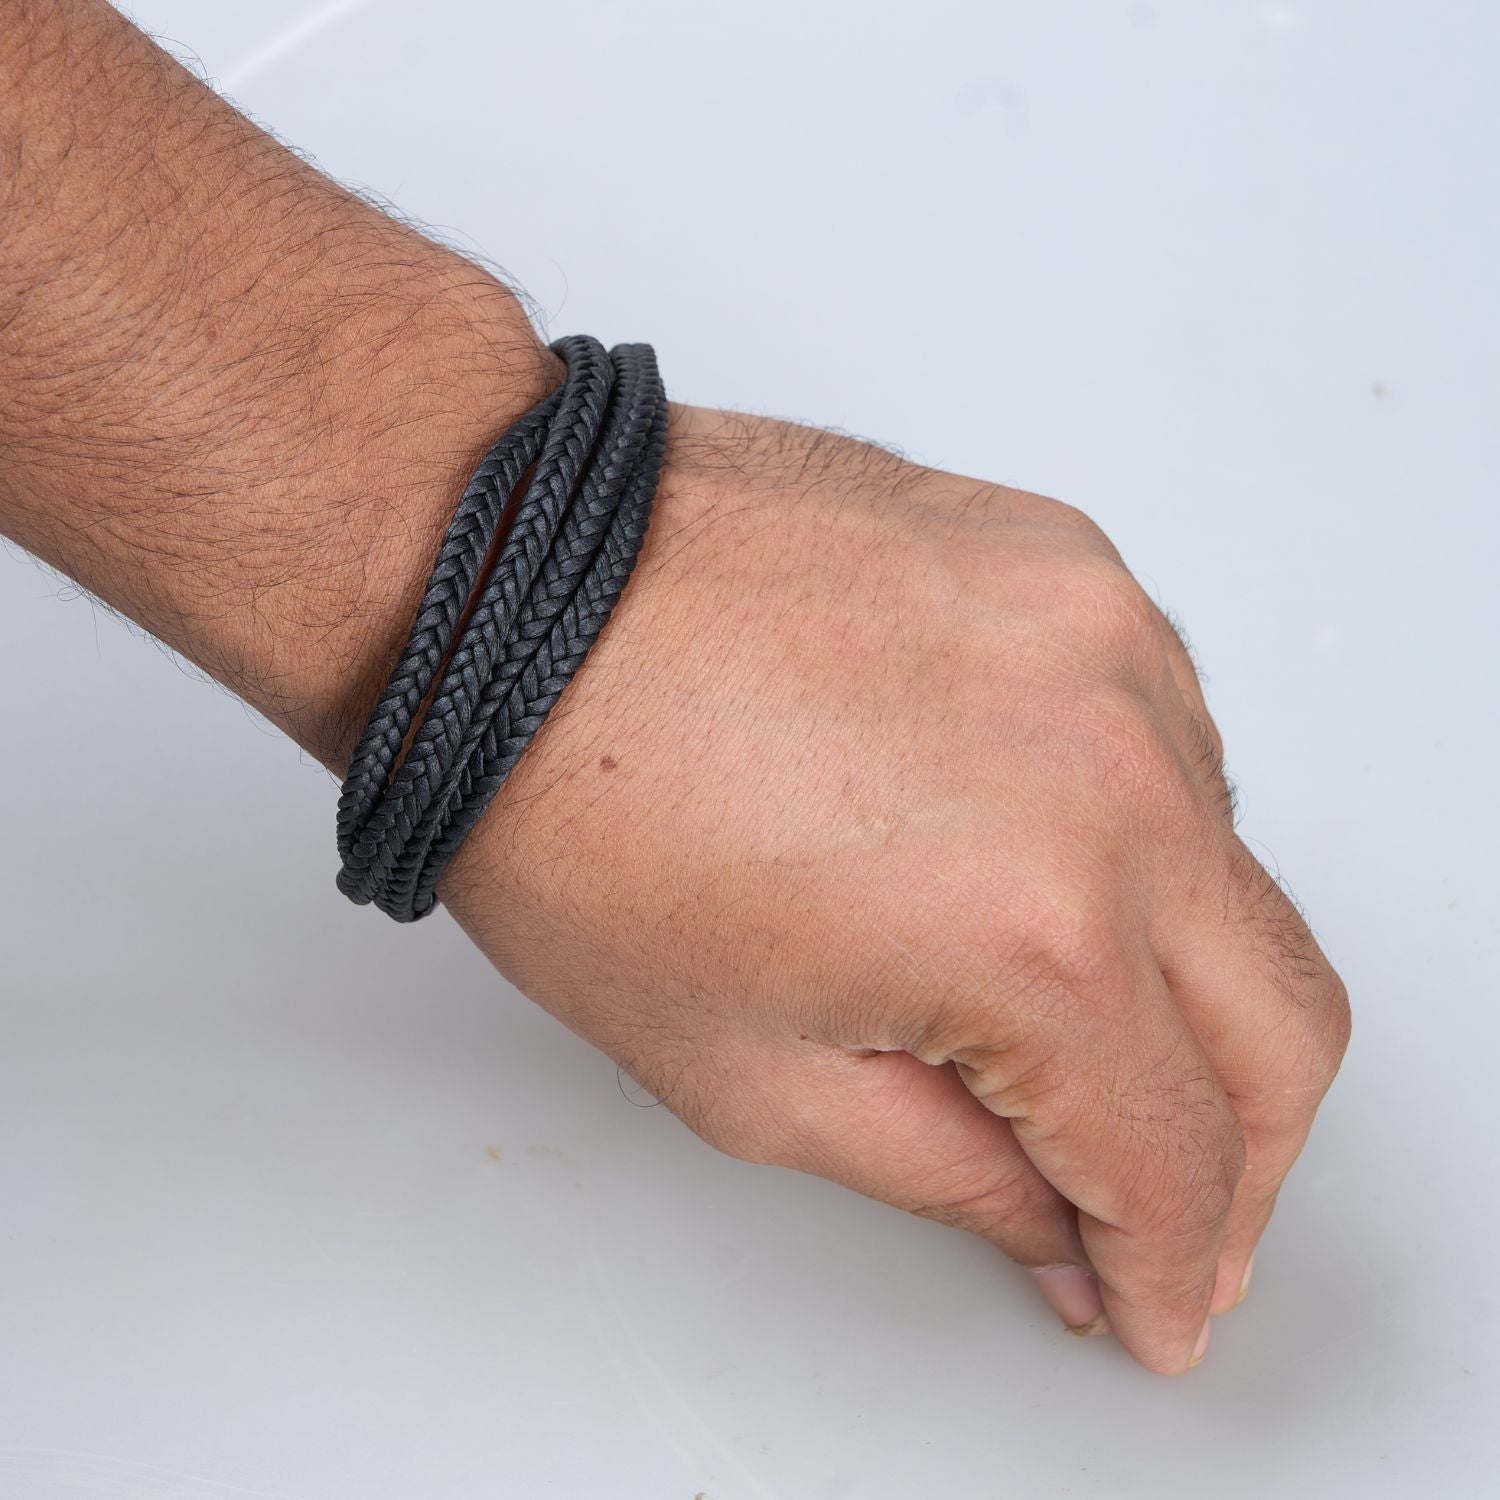 Display of a Black colored Multi-string Bracelet for men, with screw clasp on a hand.